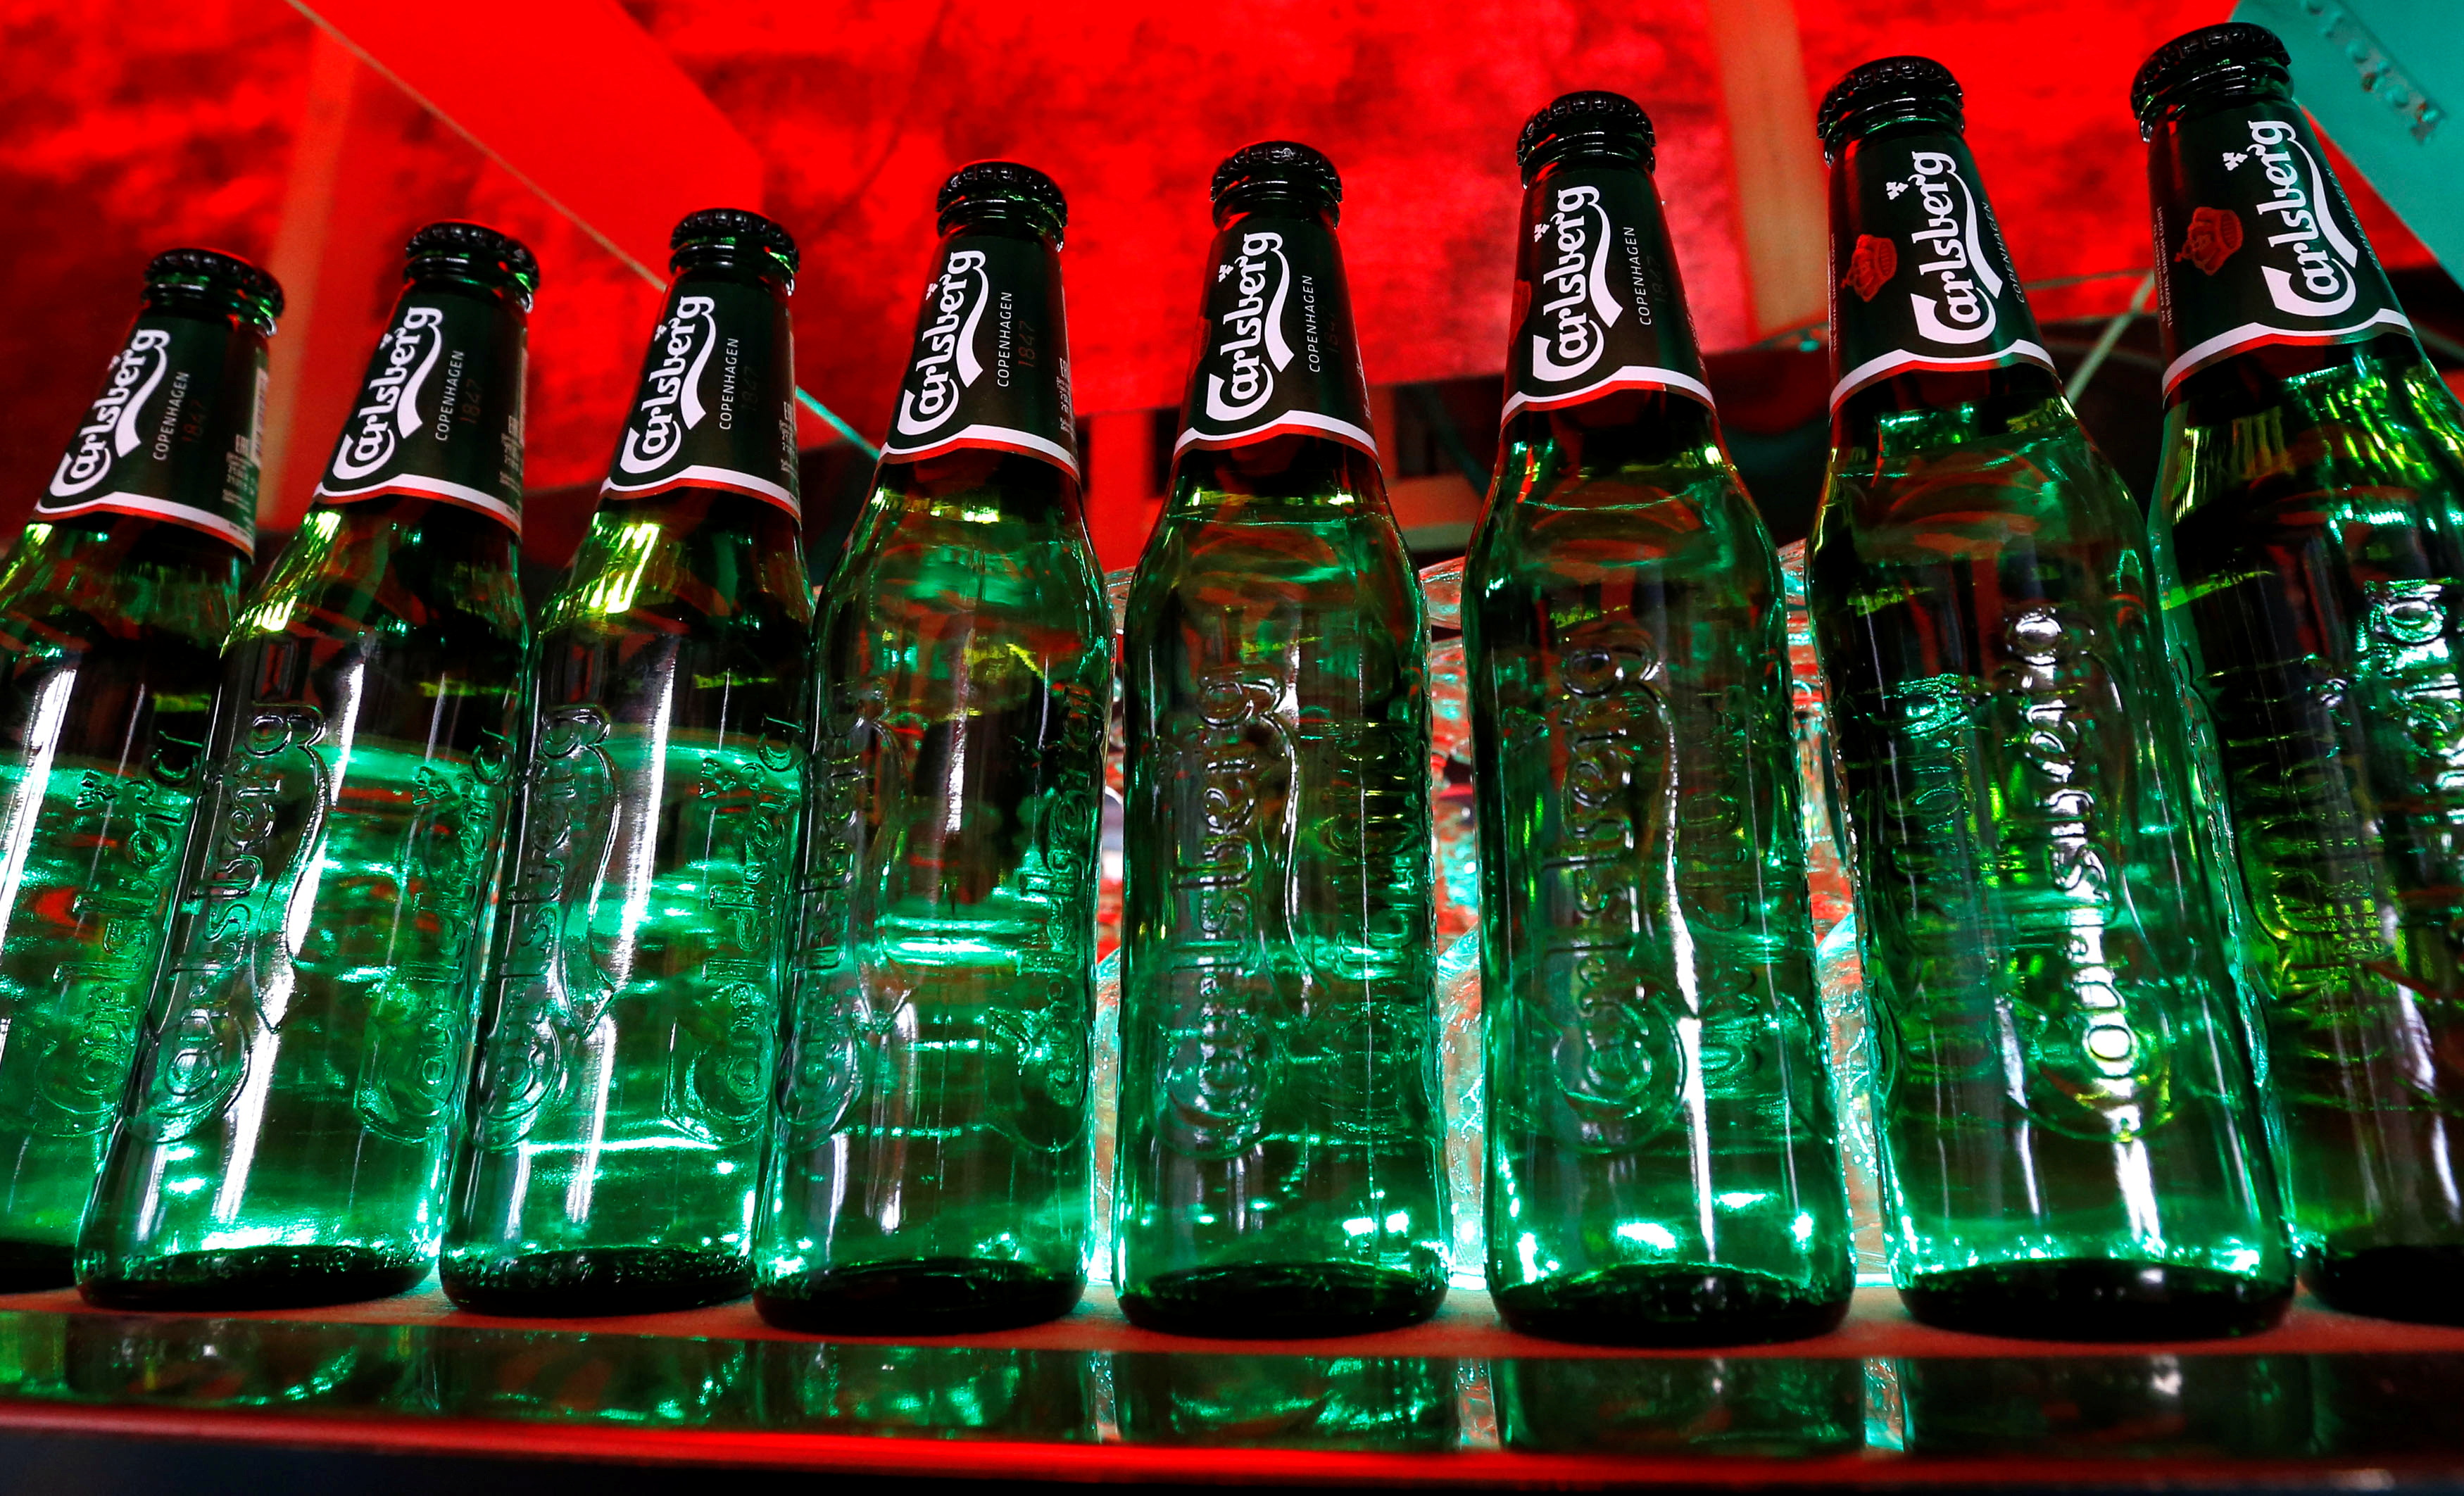 Bottles of Carlsberg beer are seen in a bar in St. Petersburg, Russia, June 17, 2014. REUTERS/Alexander Demianchuk/File Photo